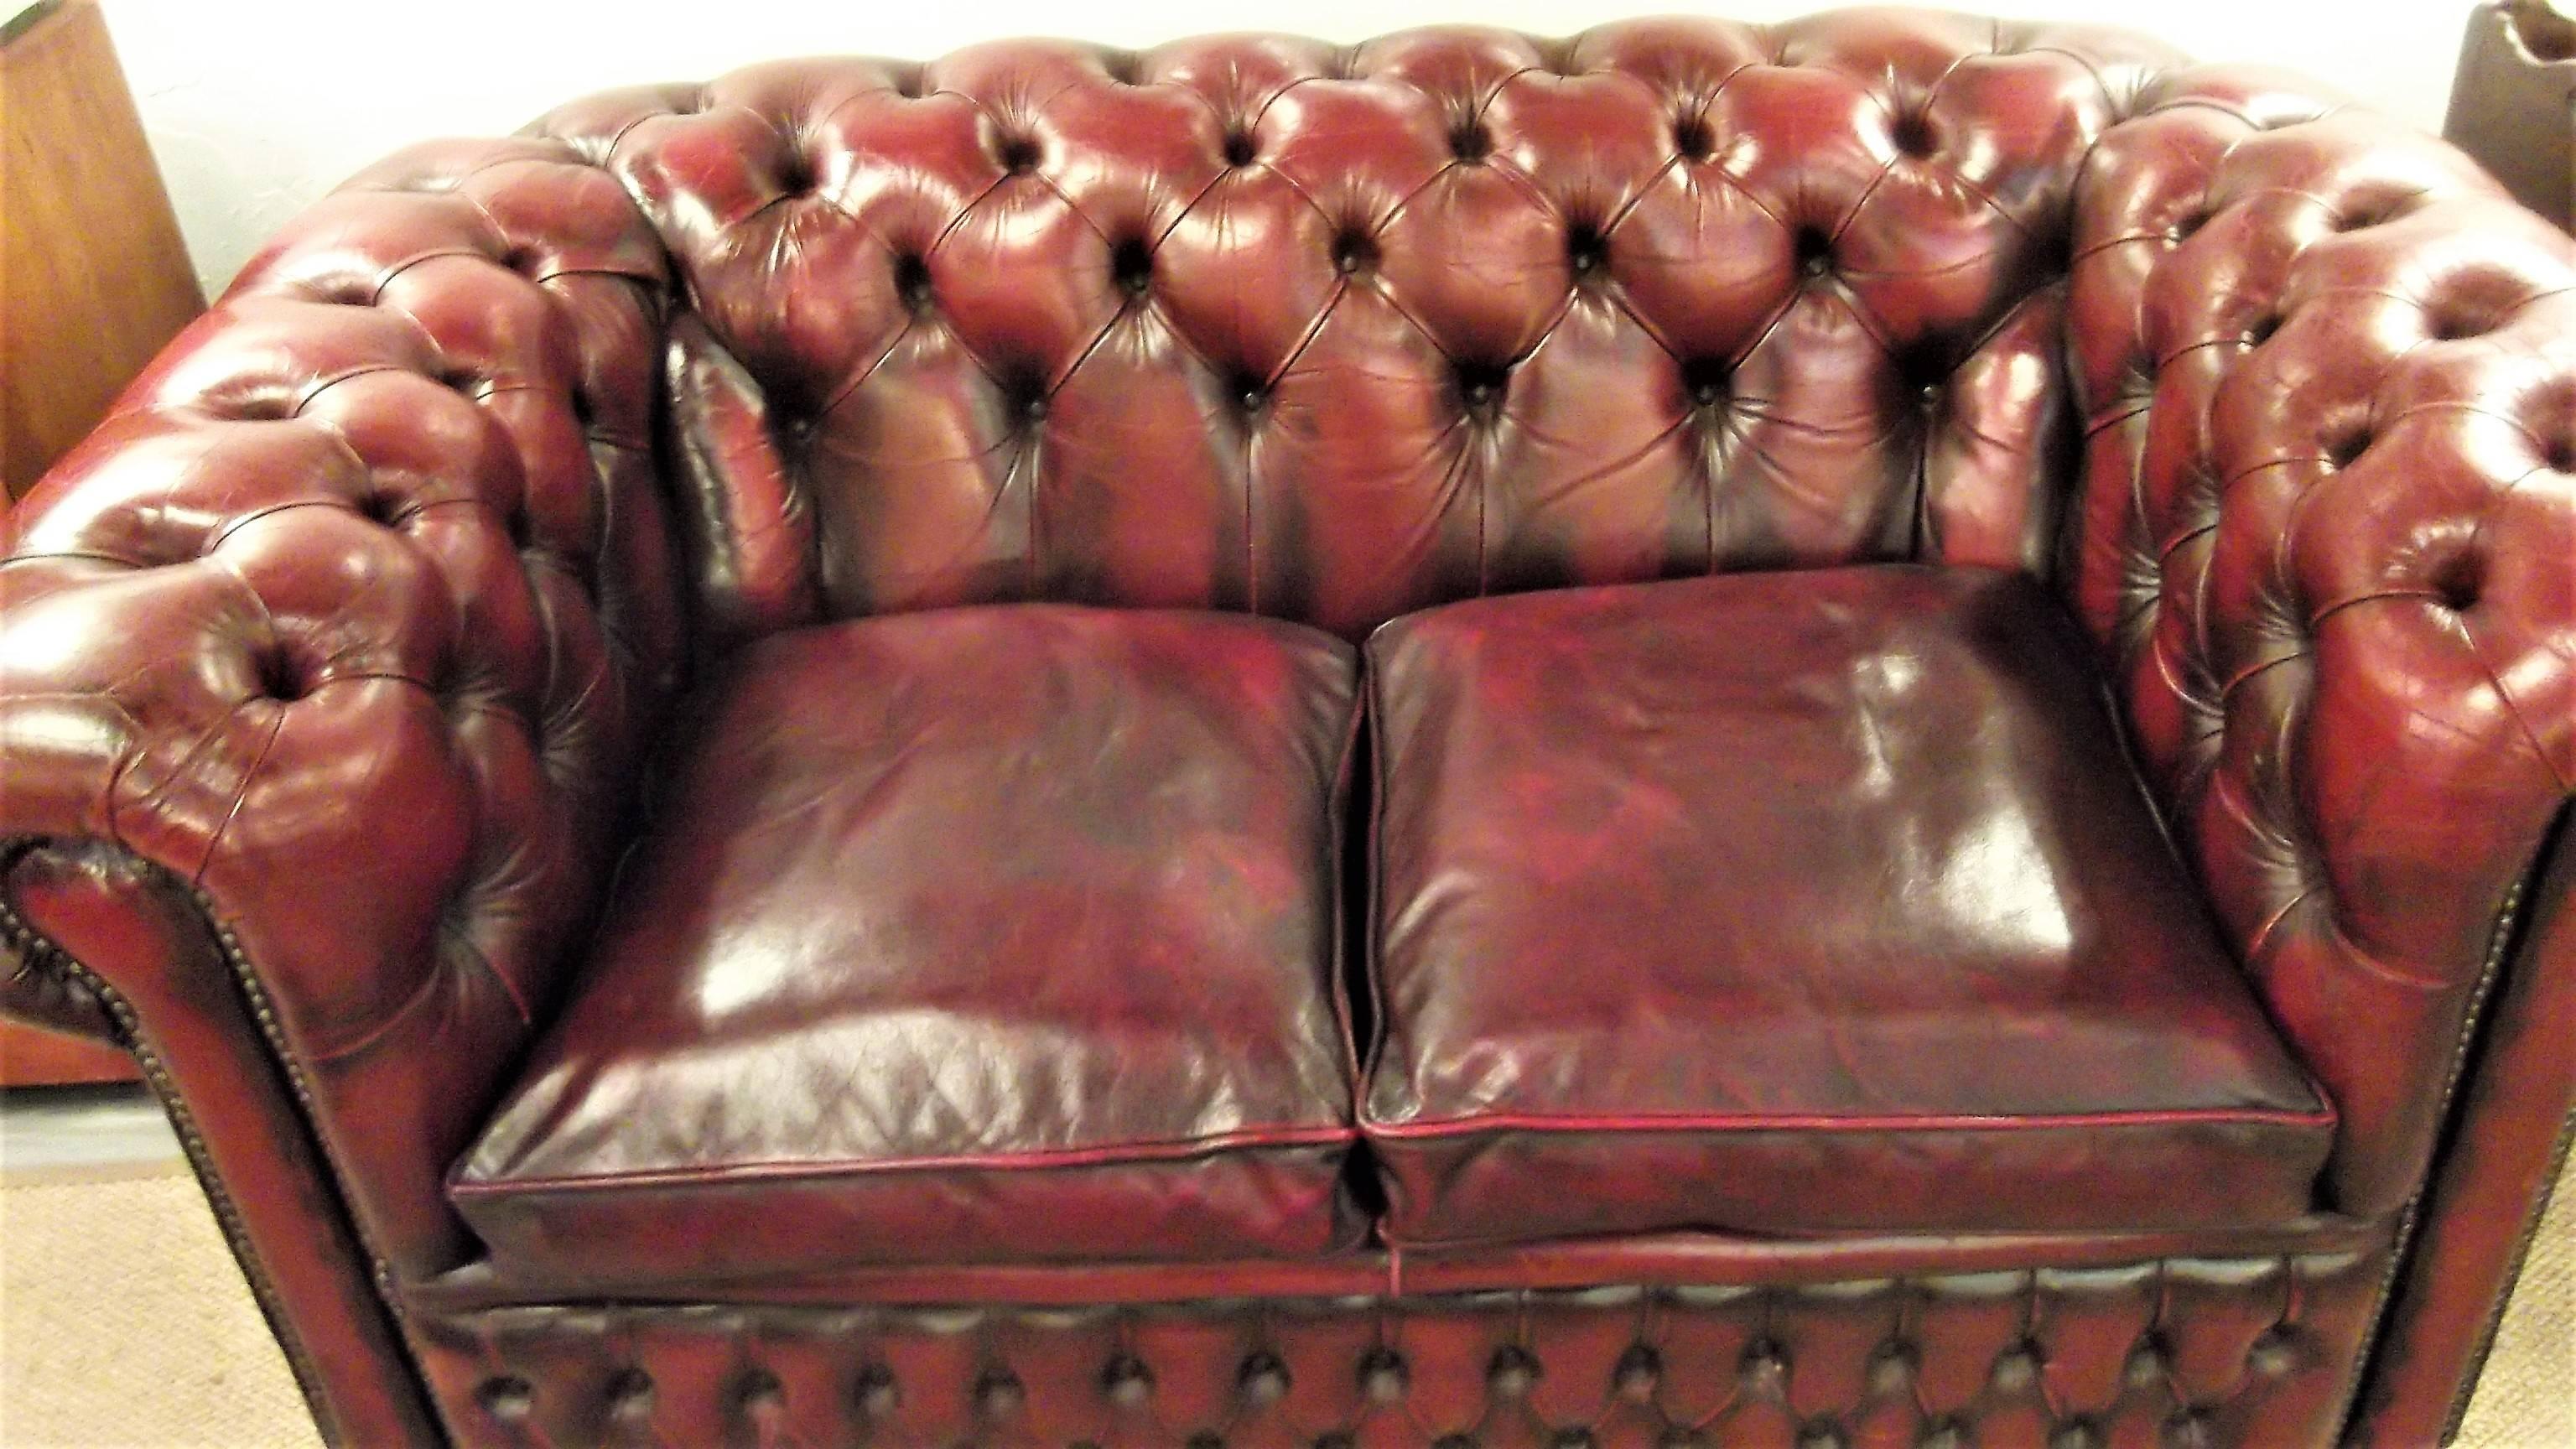 Classic English Chesterfield love seat with original cordovan leather. The arms and back have deep biscuit tufting with the seat being loose cushions.